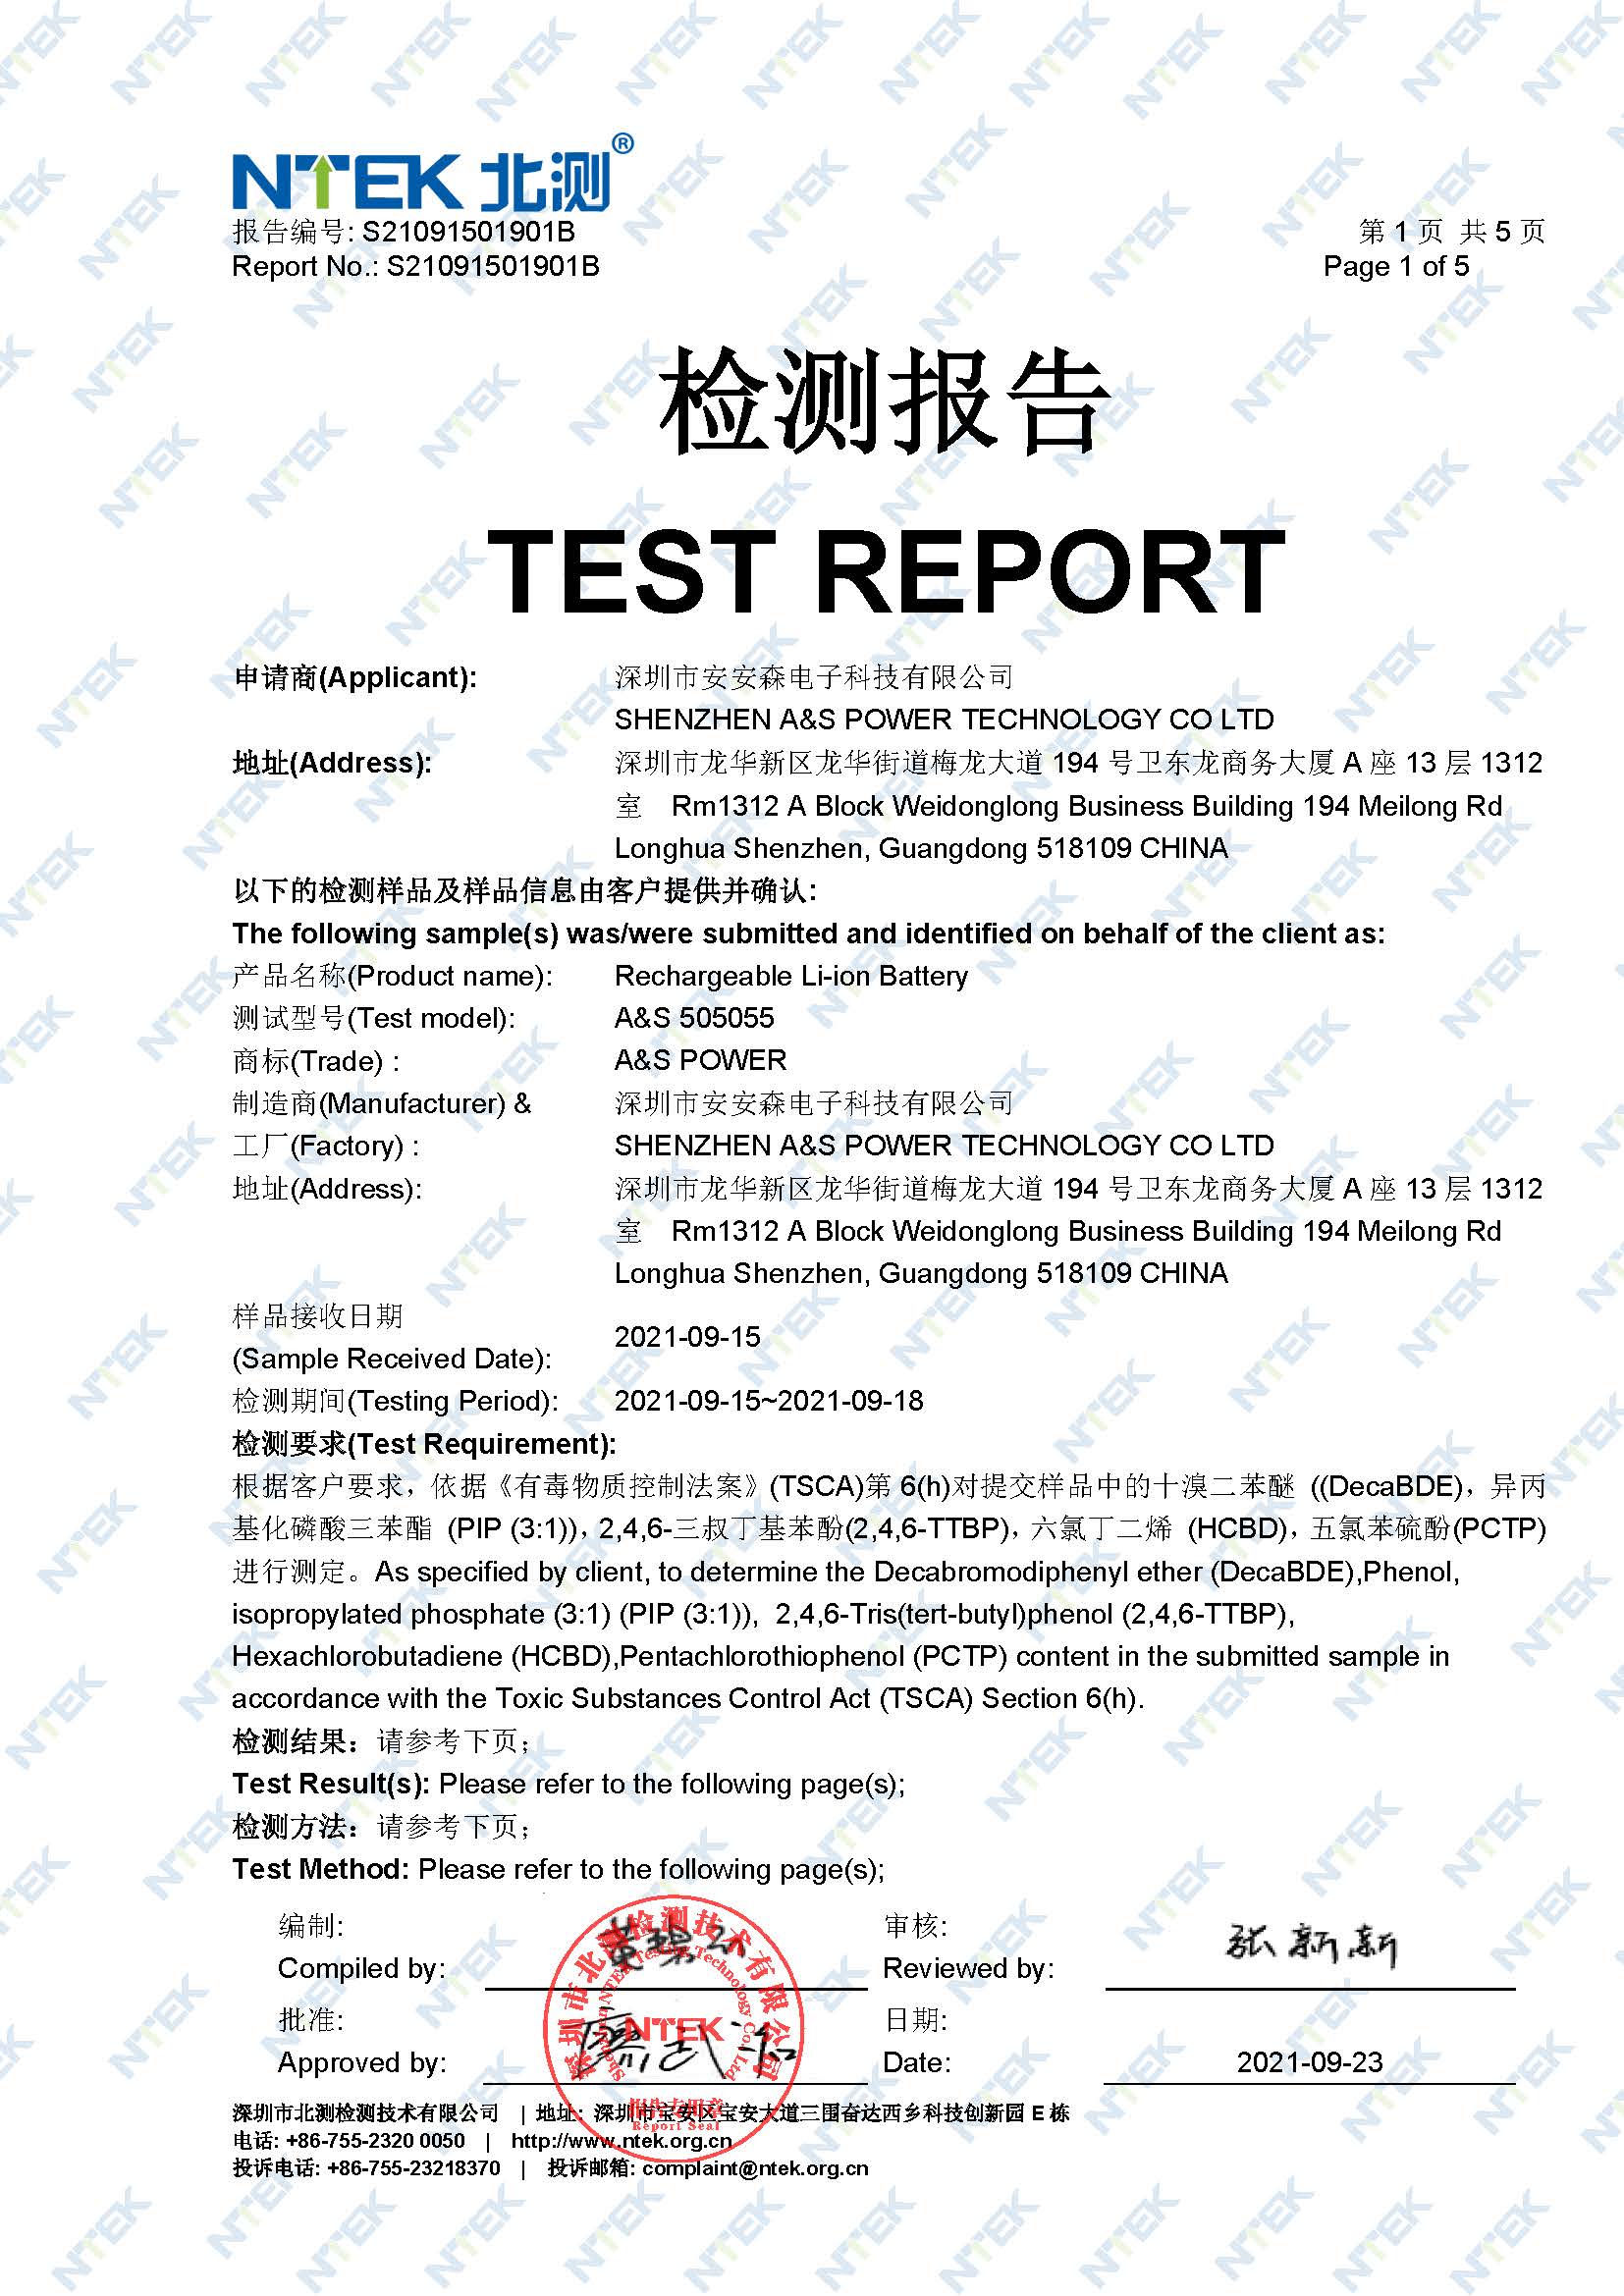 A&S Power 505055 Lithium polymer battery TSCA REPORT